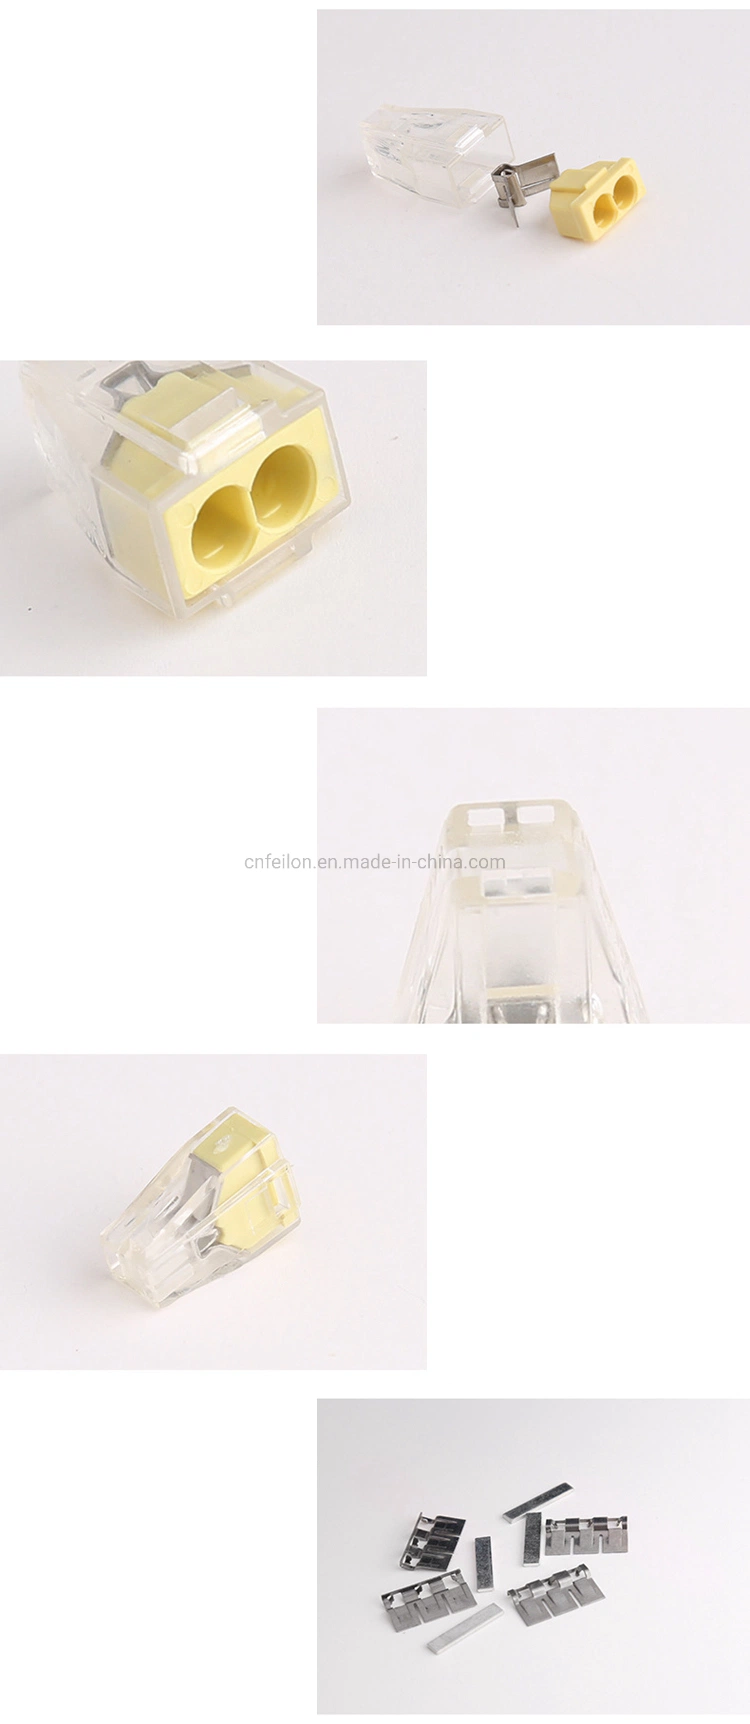 Pct-102 Pct102 773-102 Push Wire Wiring Connector for Junction Box 2 Pin Conductor Terminal Block Wire Connector Can Customerized Packing Compact Splicing